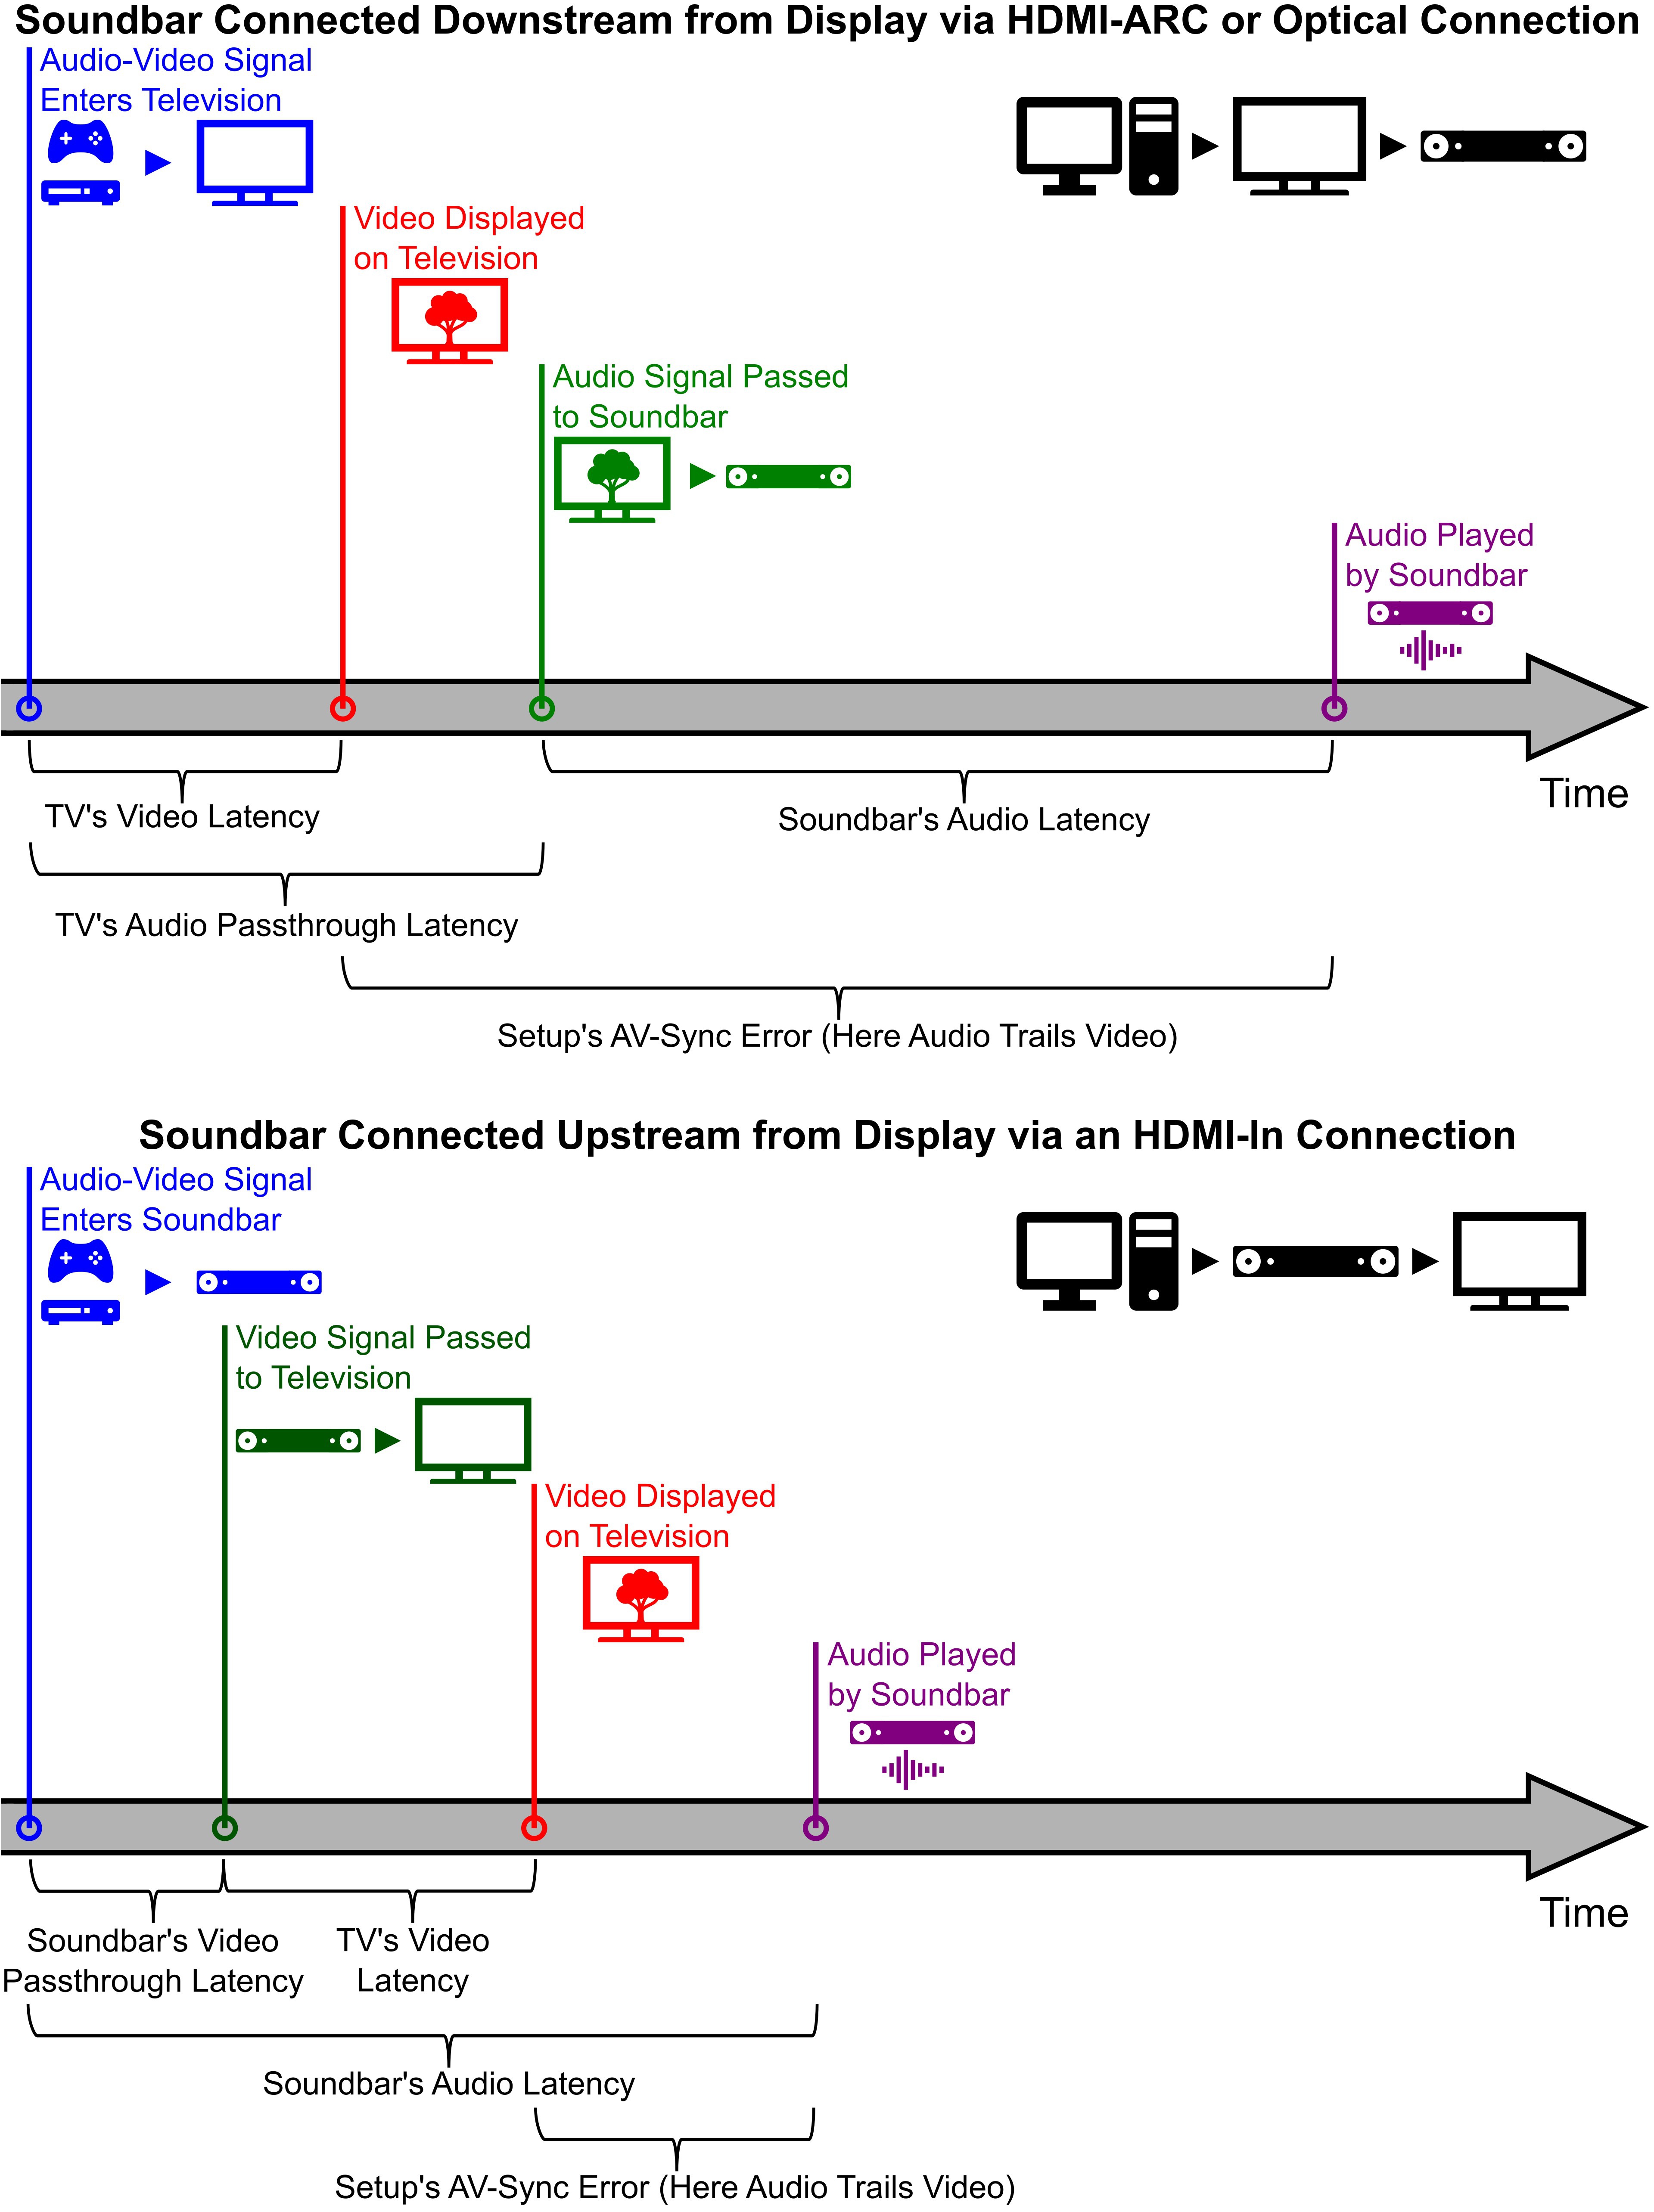 Timelines showing how a display’s video latency, a soundbar’s audio latency, and any signal passthrough latencies result in the AV-sync error of the entire setup. AV-sync error is also dependant on the method used to connect the devices together.